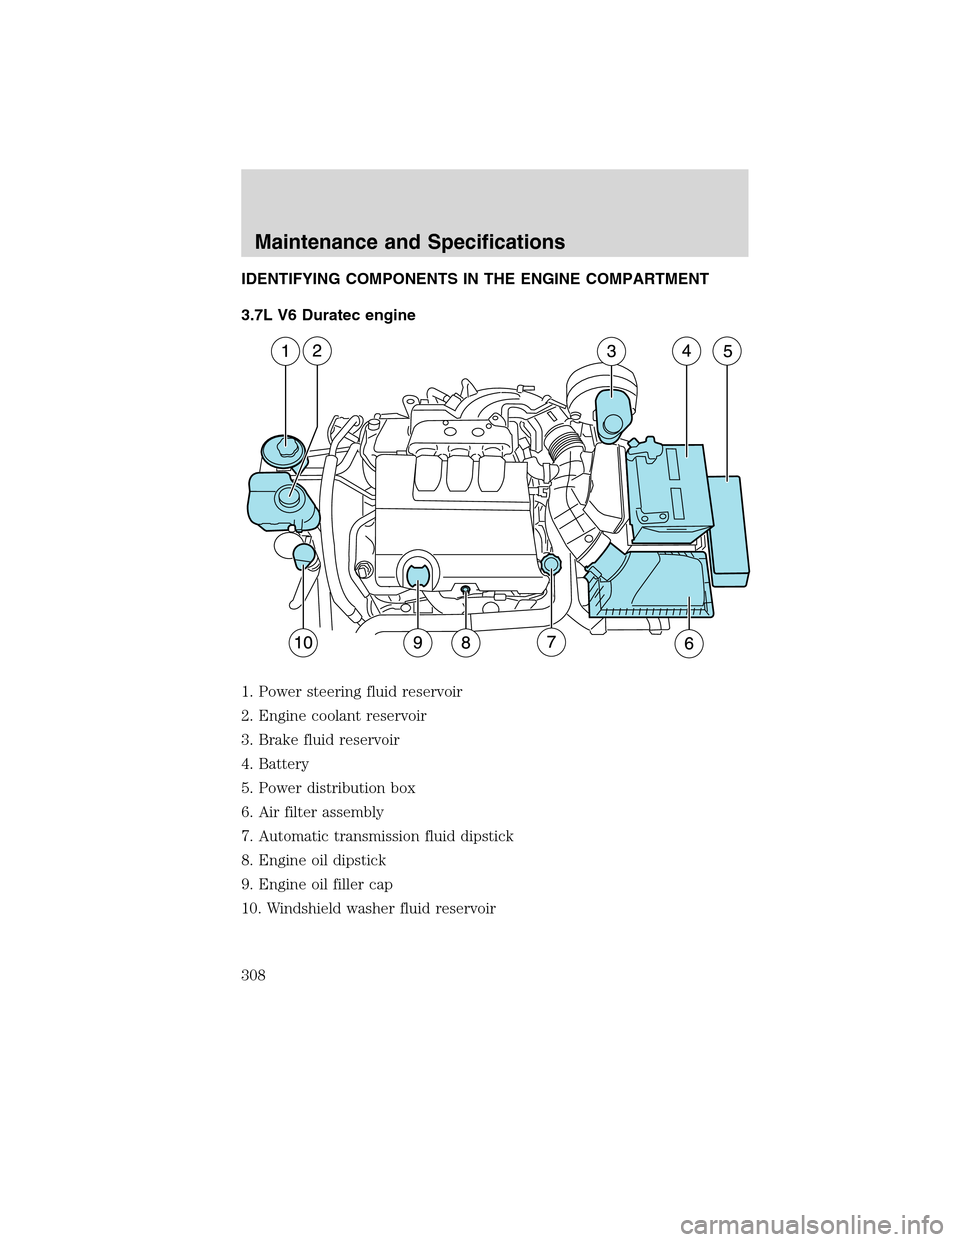 LINCOLN MKS 2010  Owners Manual IDENTIFYING COMPONENTS IN THE ENGINE COMPARTMENT
3.7L V6 Duratec engine
1. Power steering fluid reservoir
2. Engine coolant reservoir
3. Brake fluid reservoir
4. Battery
5. Power distribution box
6. A